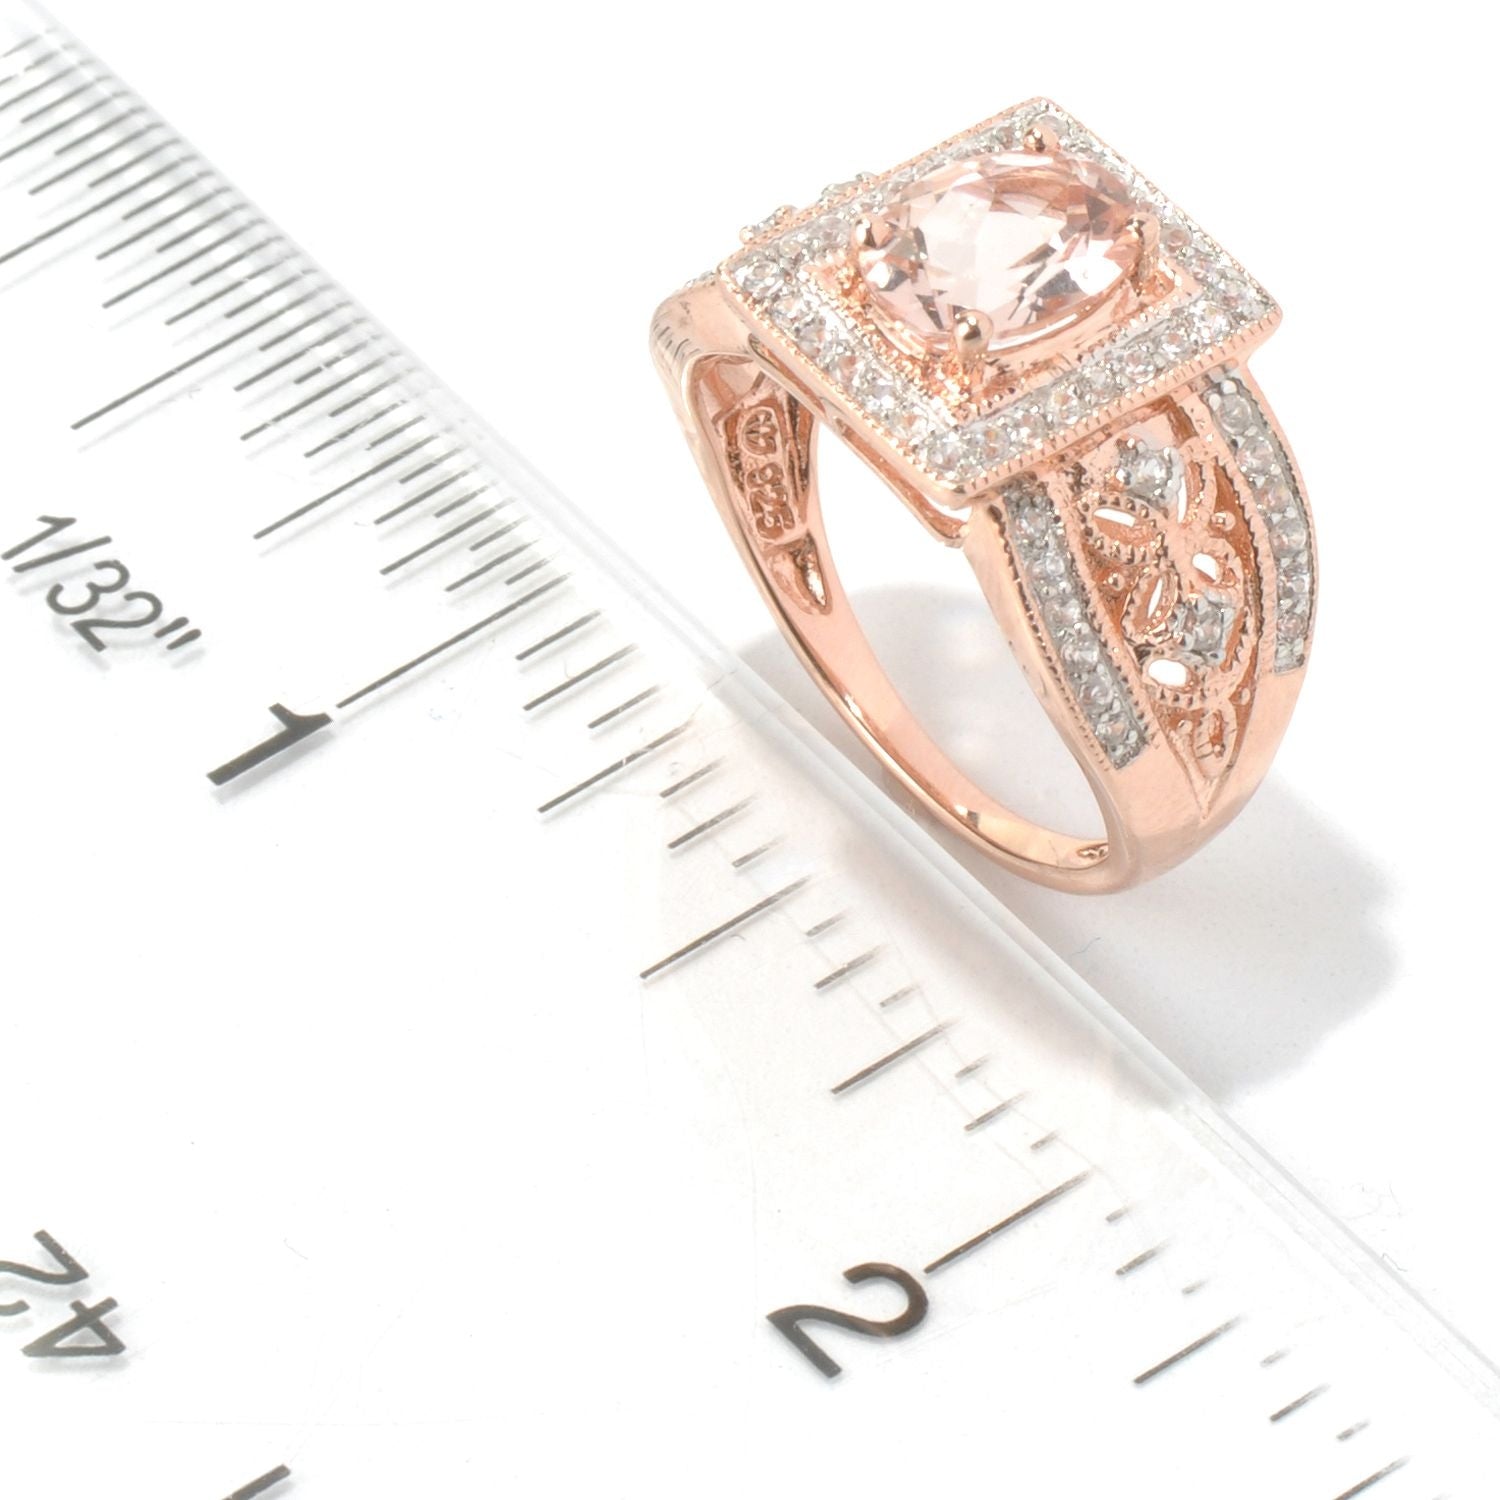 Pinctore 10k Rose Gold Morganite and Diamond Ring (1/3cttw, H-I Color, I1-I2 Clarity) - pinctore